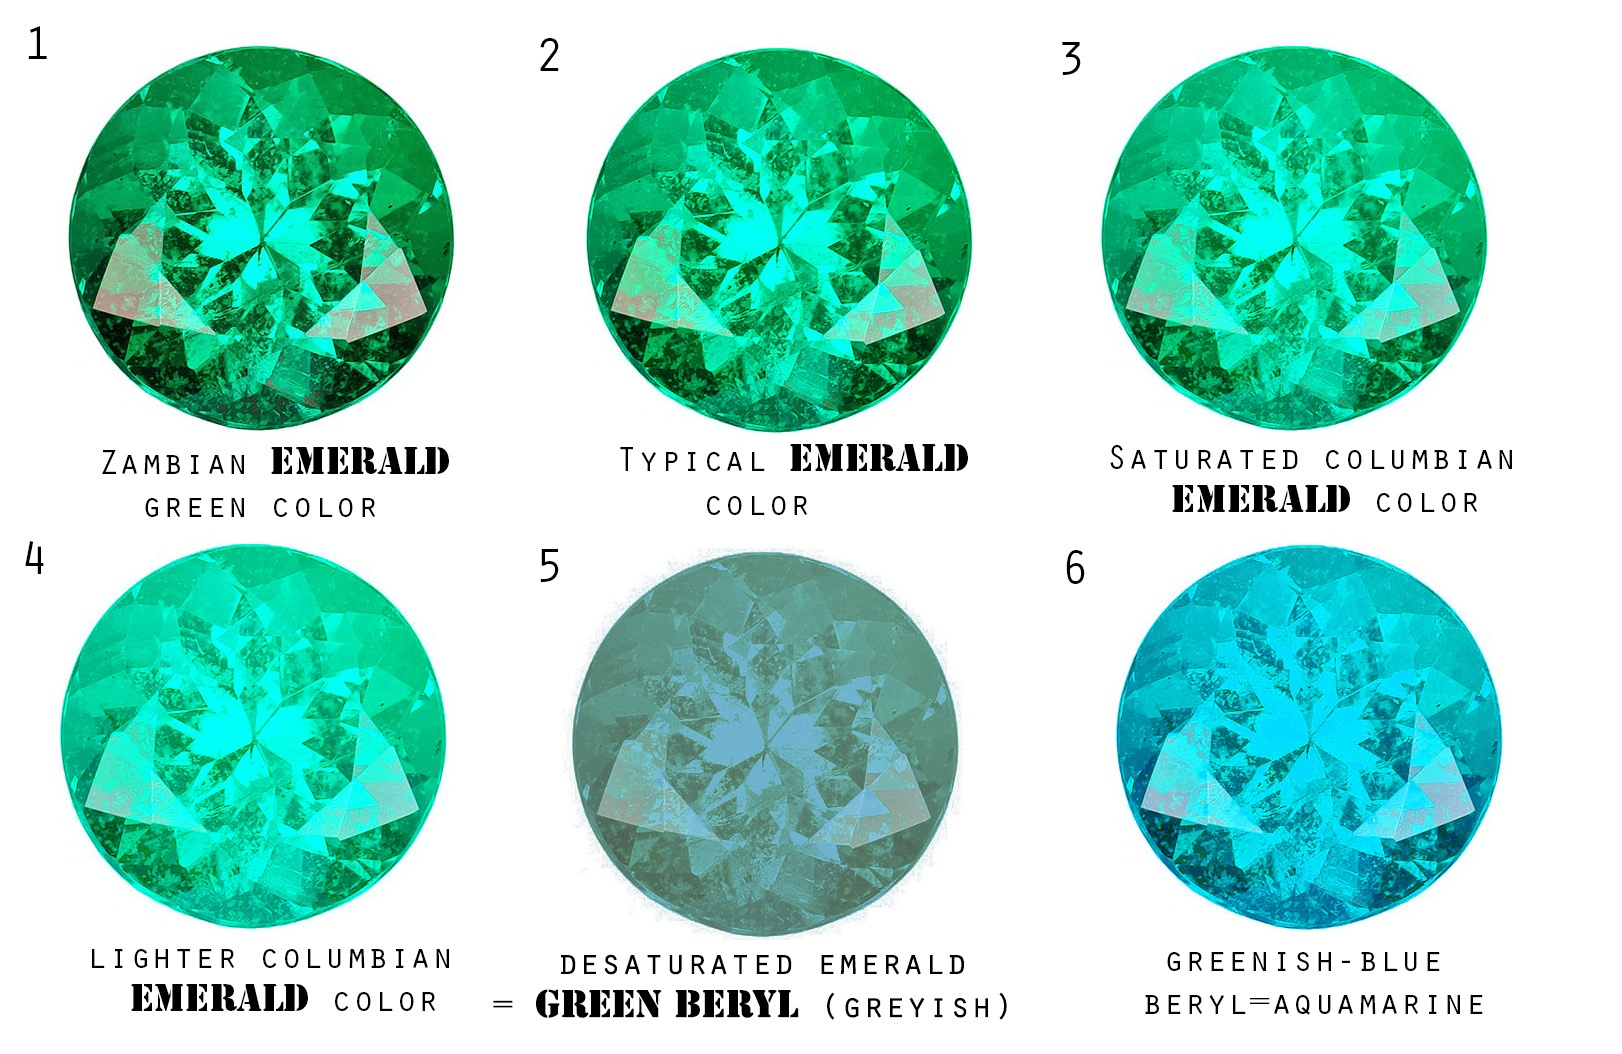 What is difference between Emerald and green Beryl